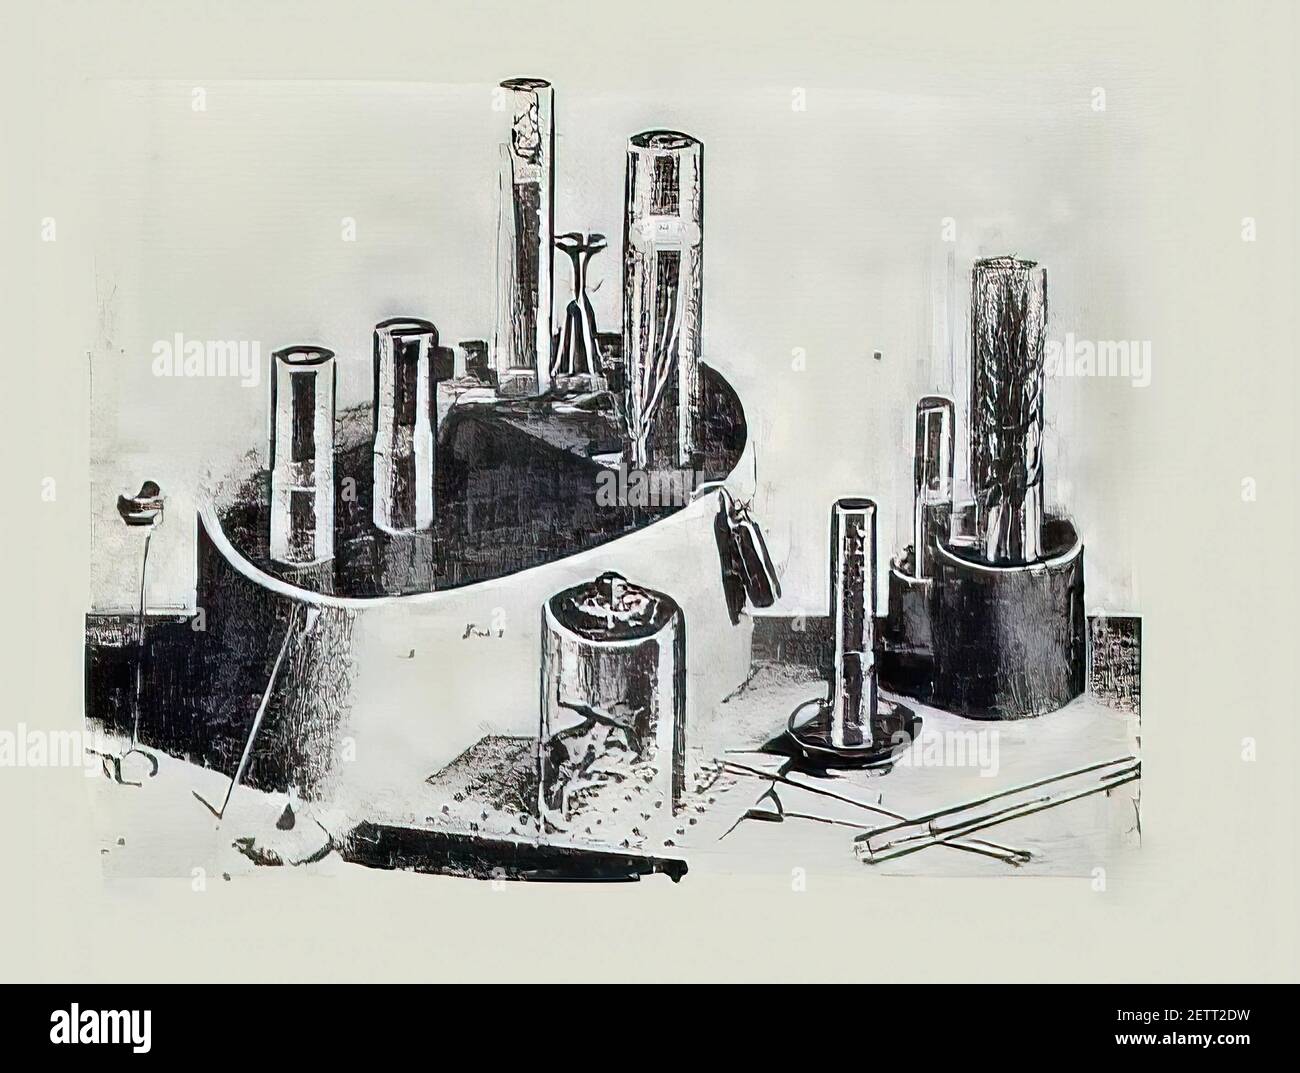 An alchemical tools illustration of the 19th century Stock Photo